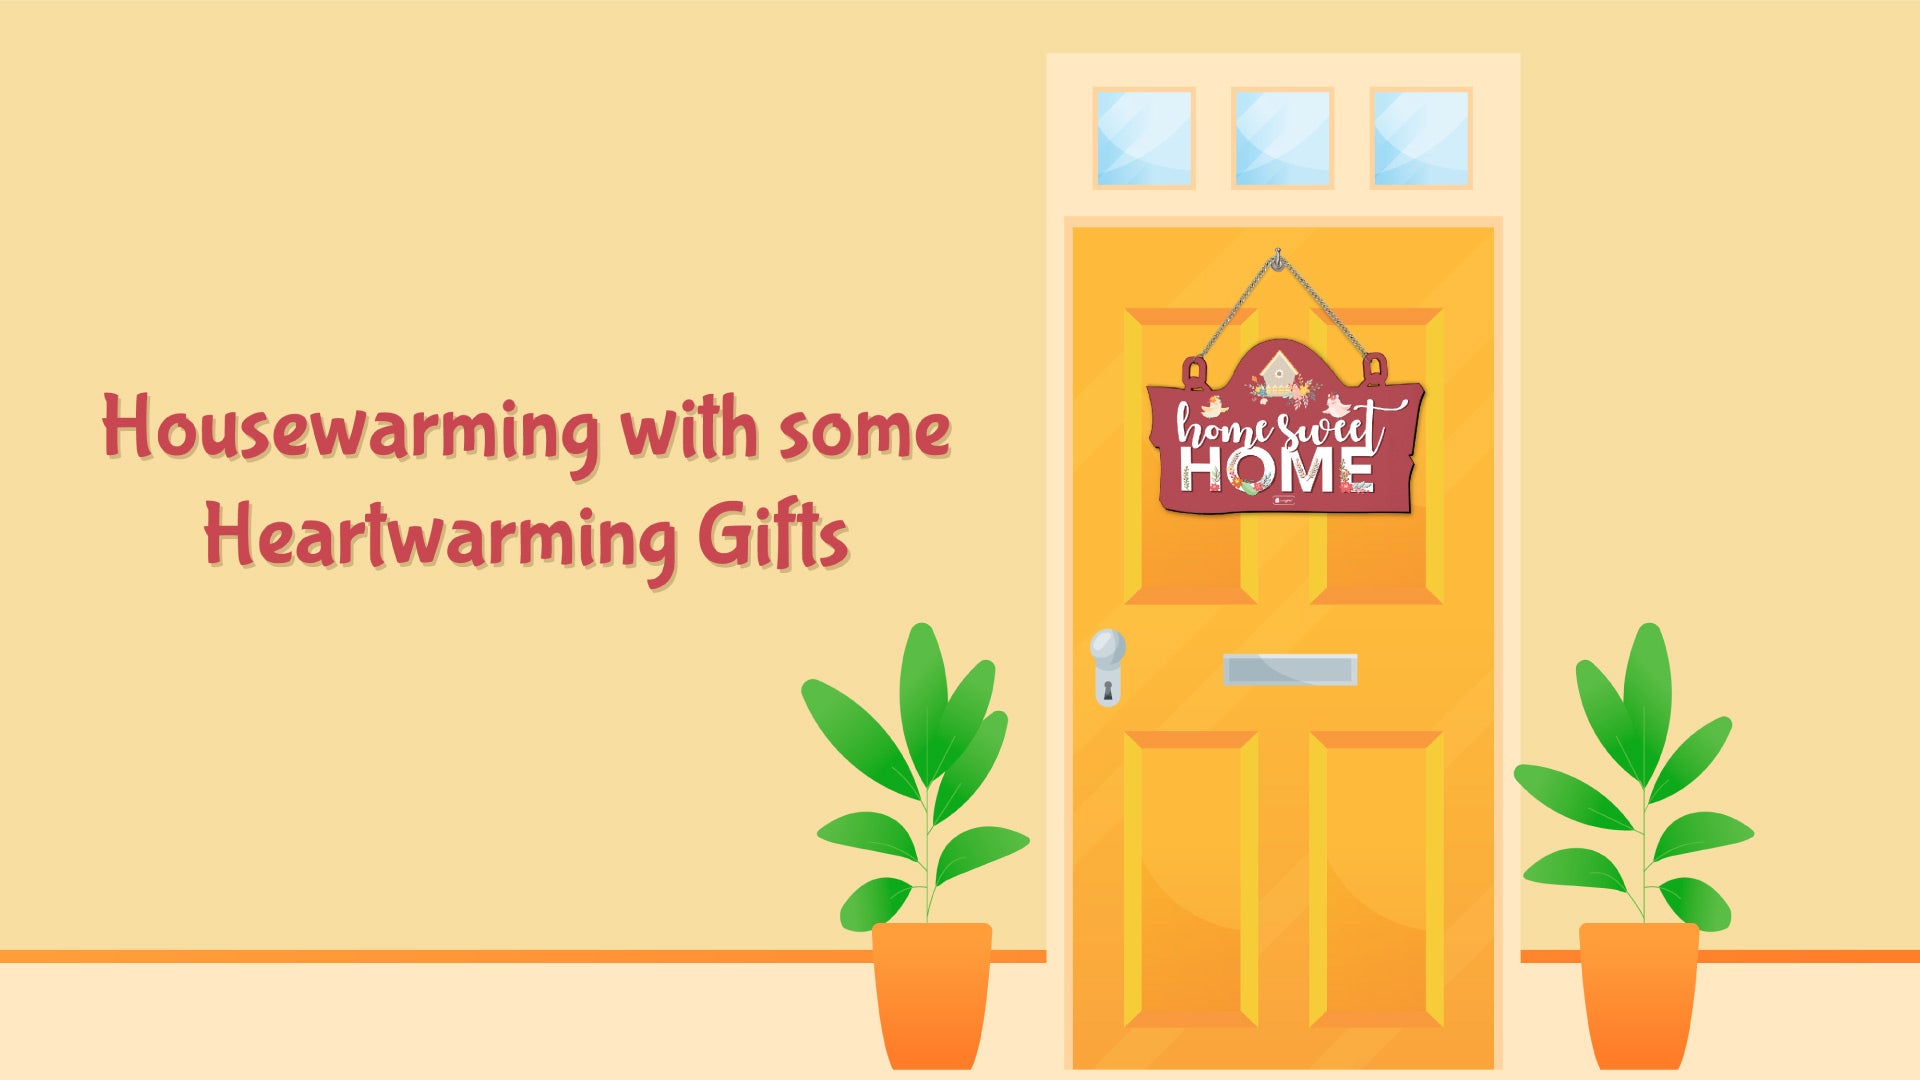 40 Gifts for Home: Fun & Practical Housewarming Gift Ideas! – Lomi